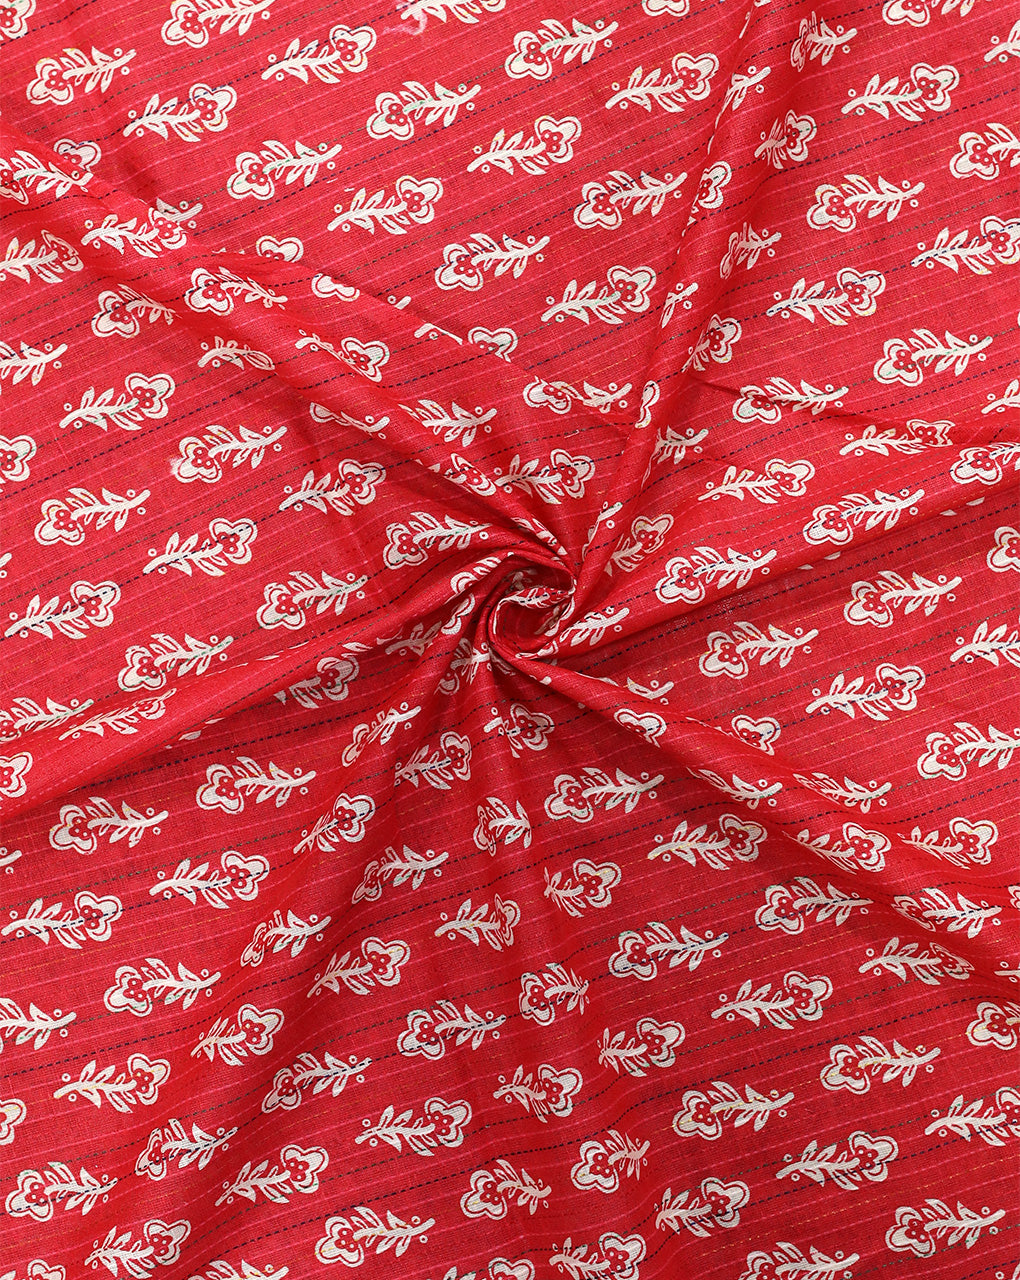 RED & WHITE SMALL FLORAL DESIGN COTTON PRINTED FABRIC